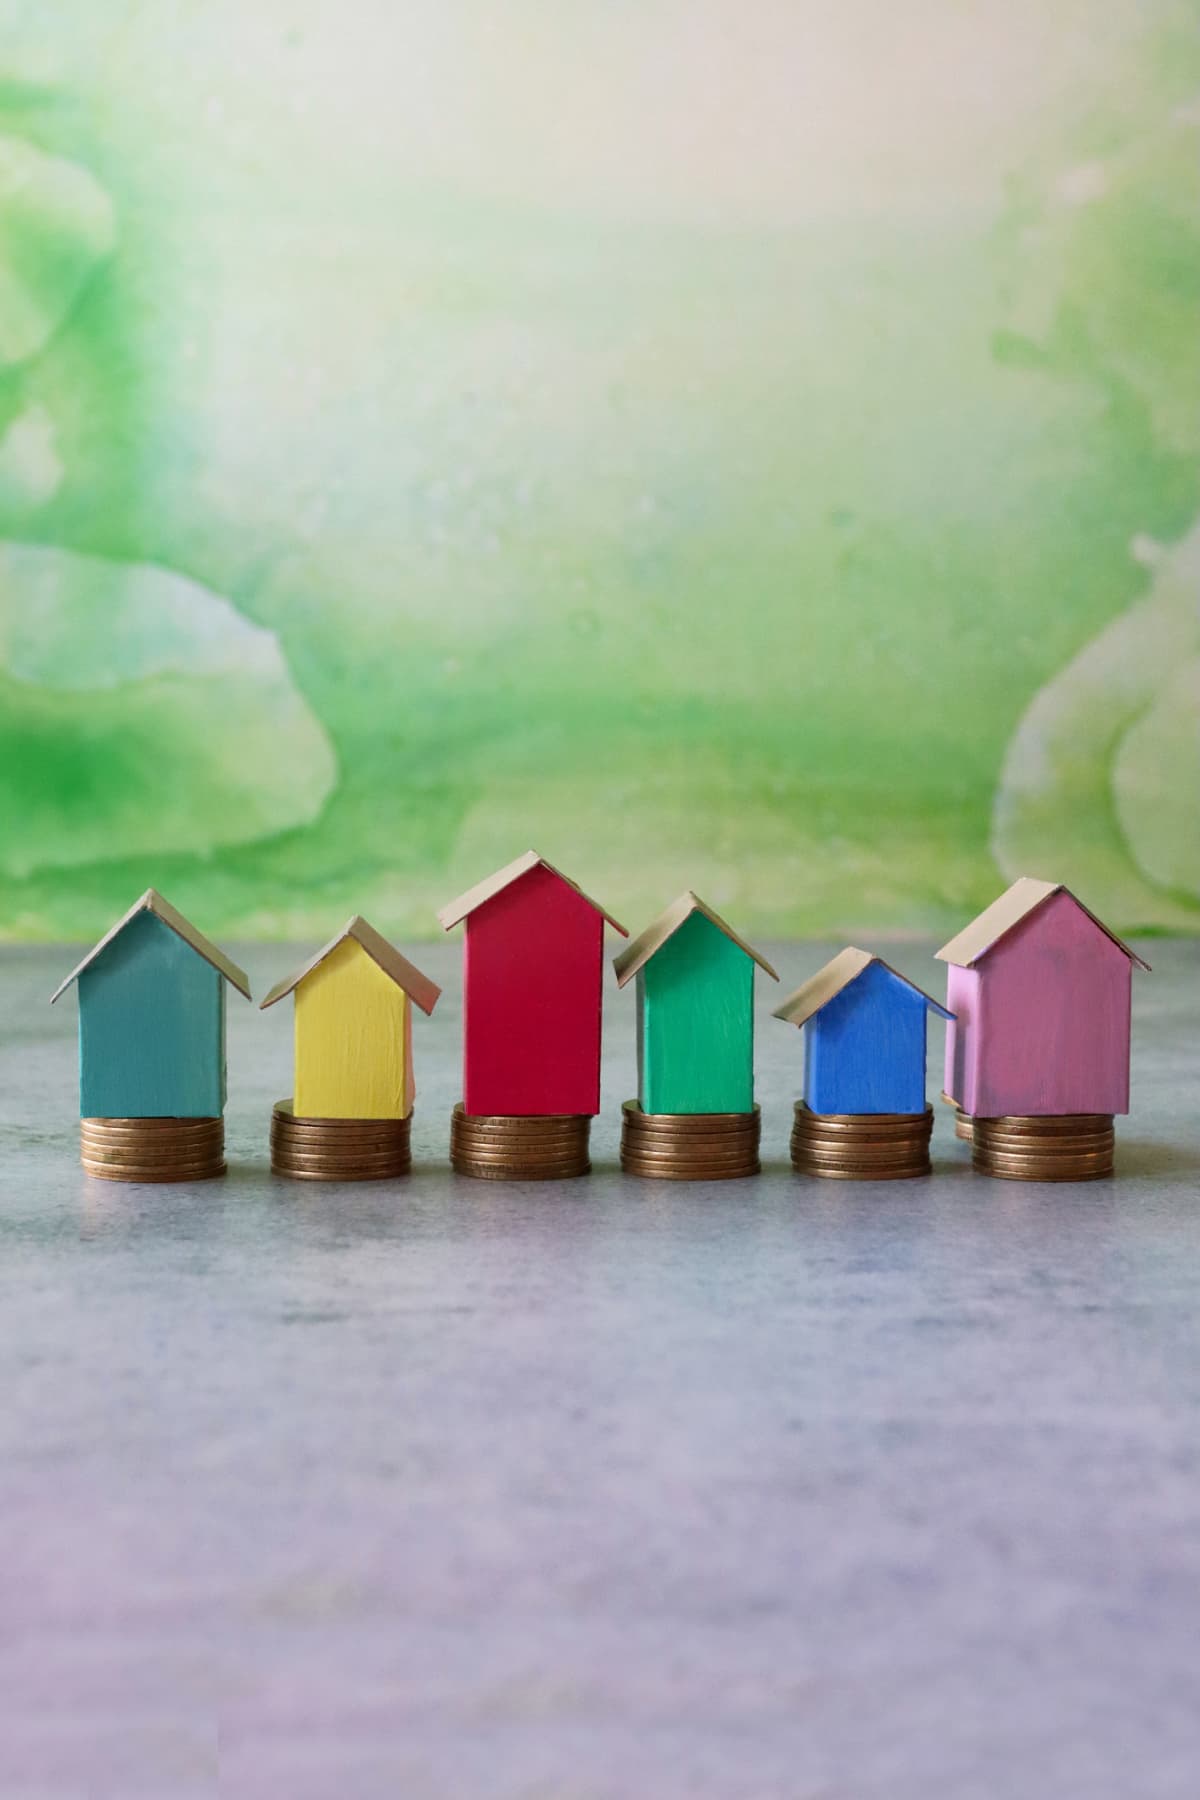 A row of multicolored cardboard houses on stacks of coins